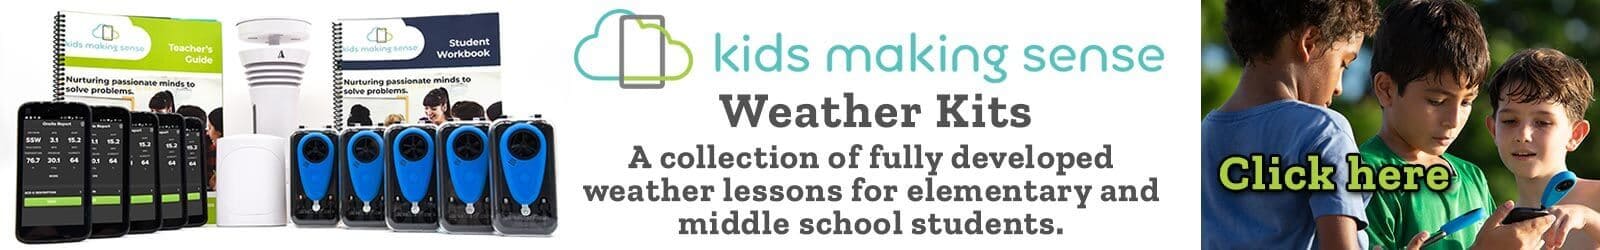 kids making sense Weather Kits A collection of fully developed weather lessons for elementary and middle school students.